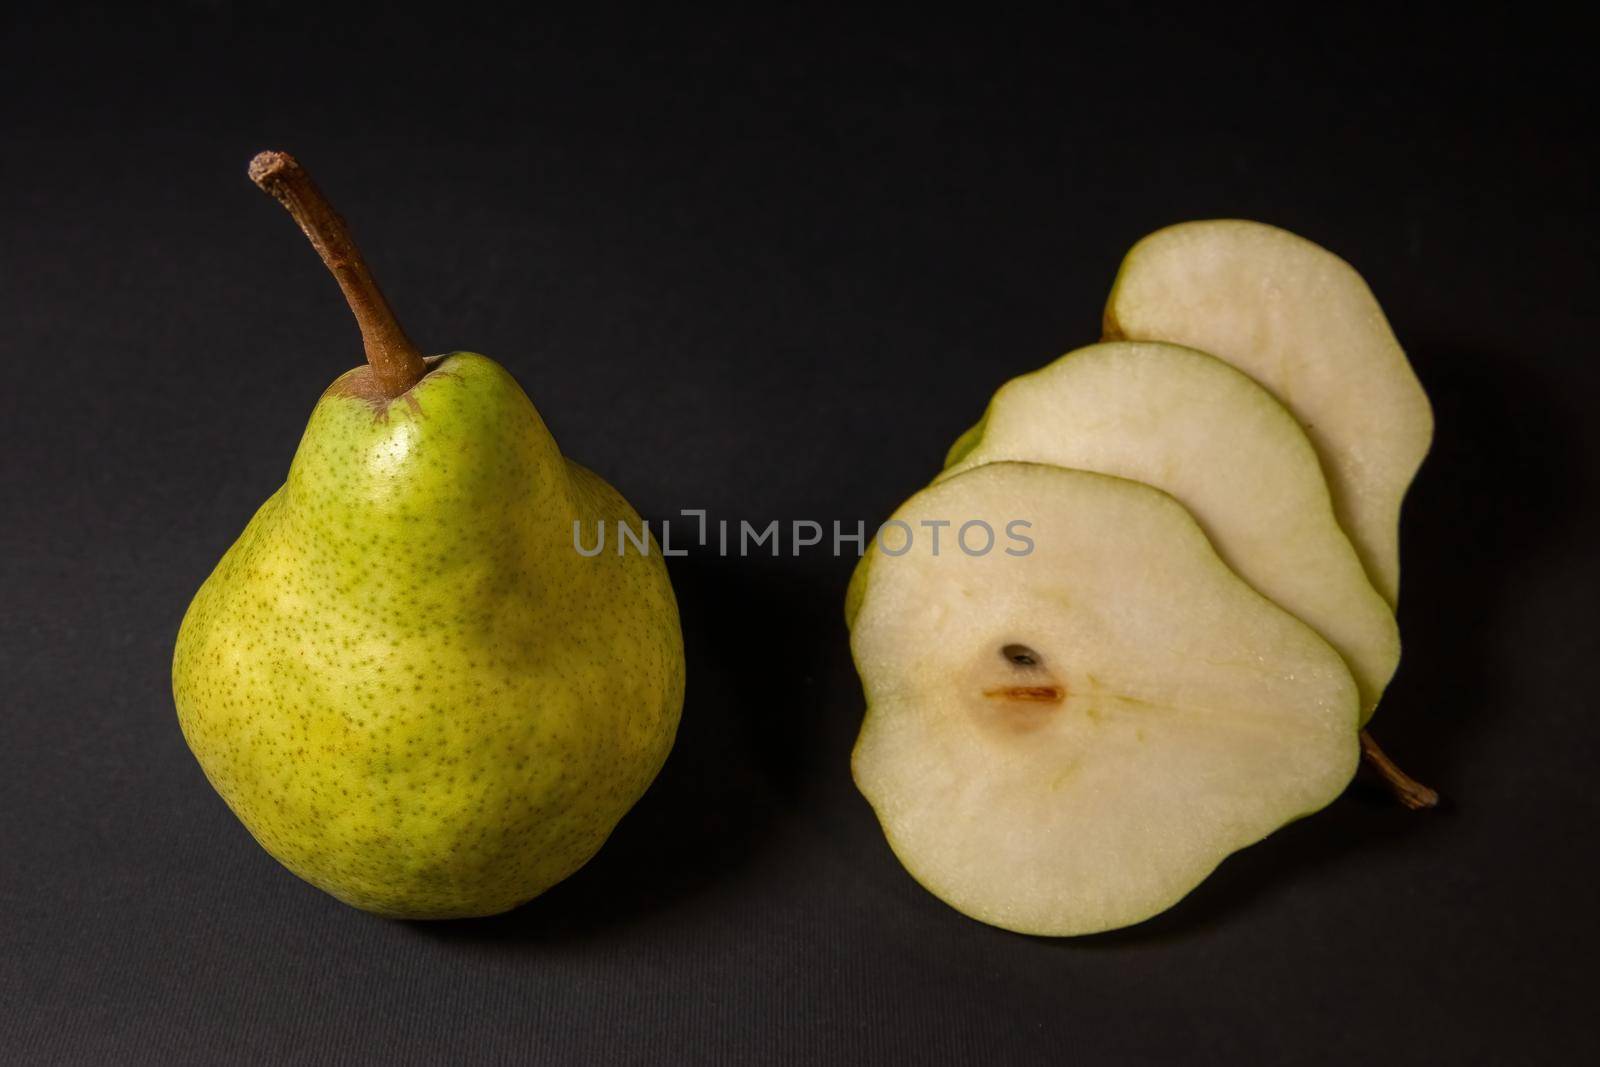 Two ripe green pears on a dark background, late november pear variety. Whole pear and sliced